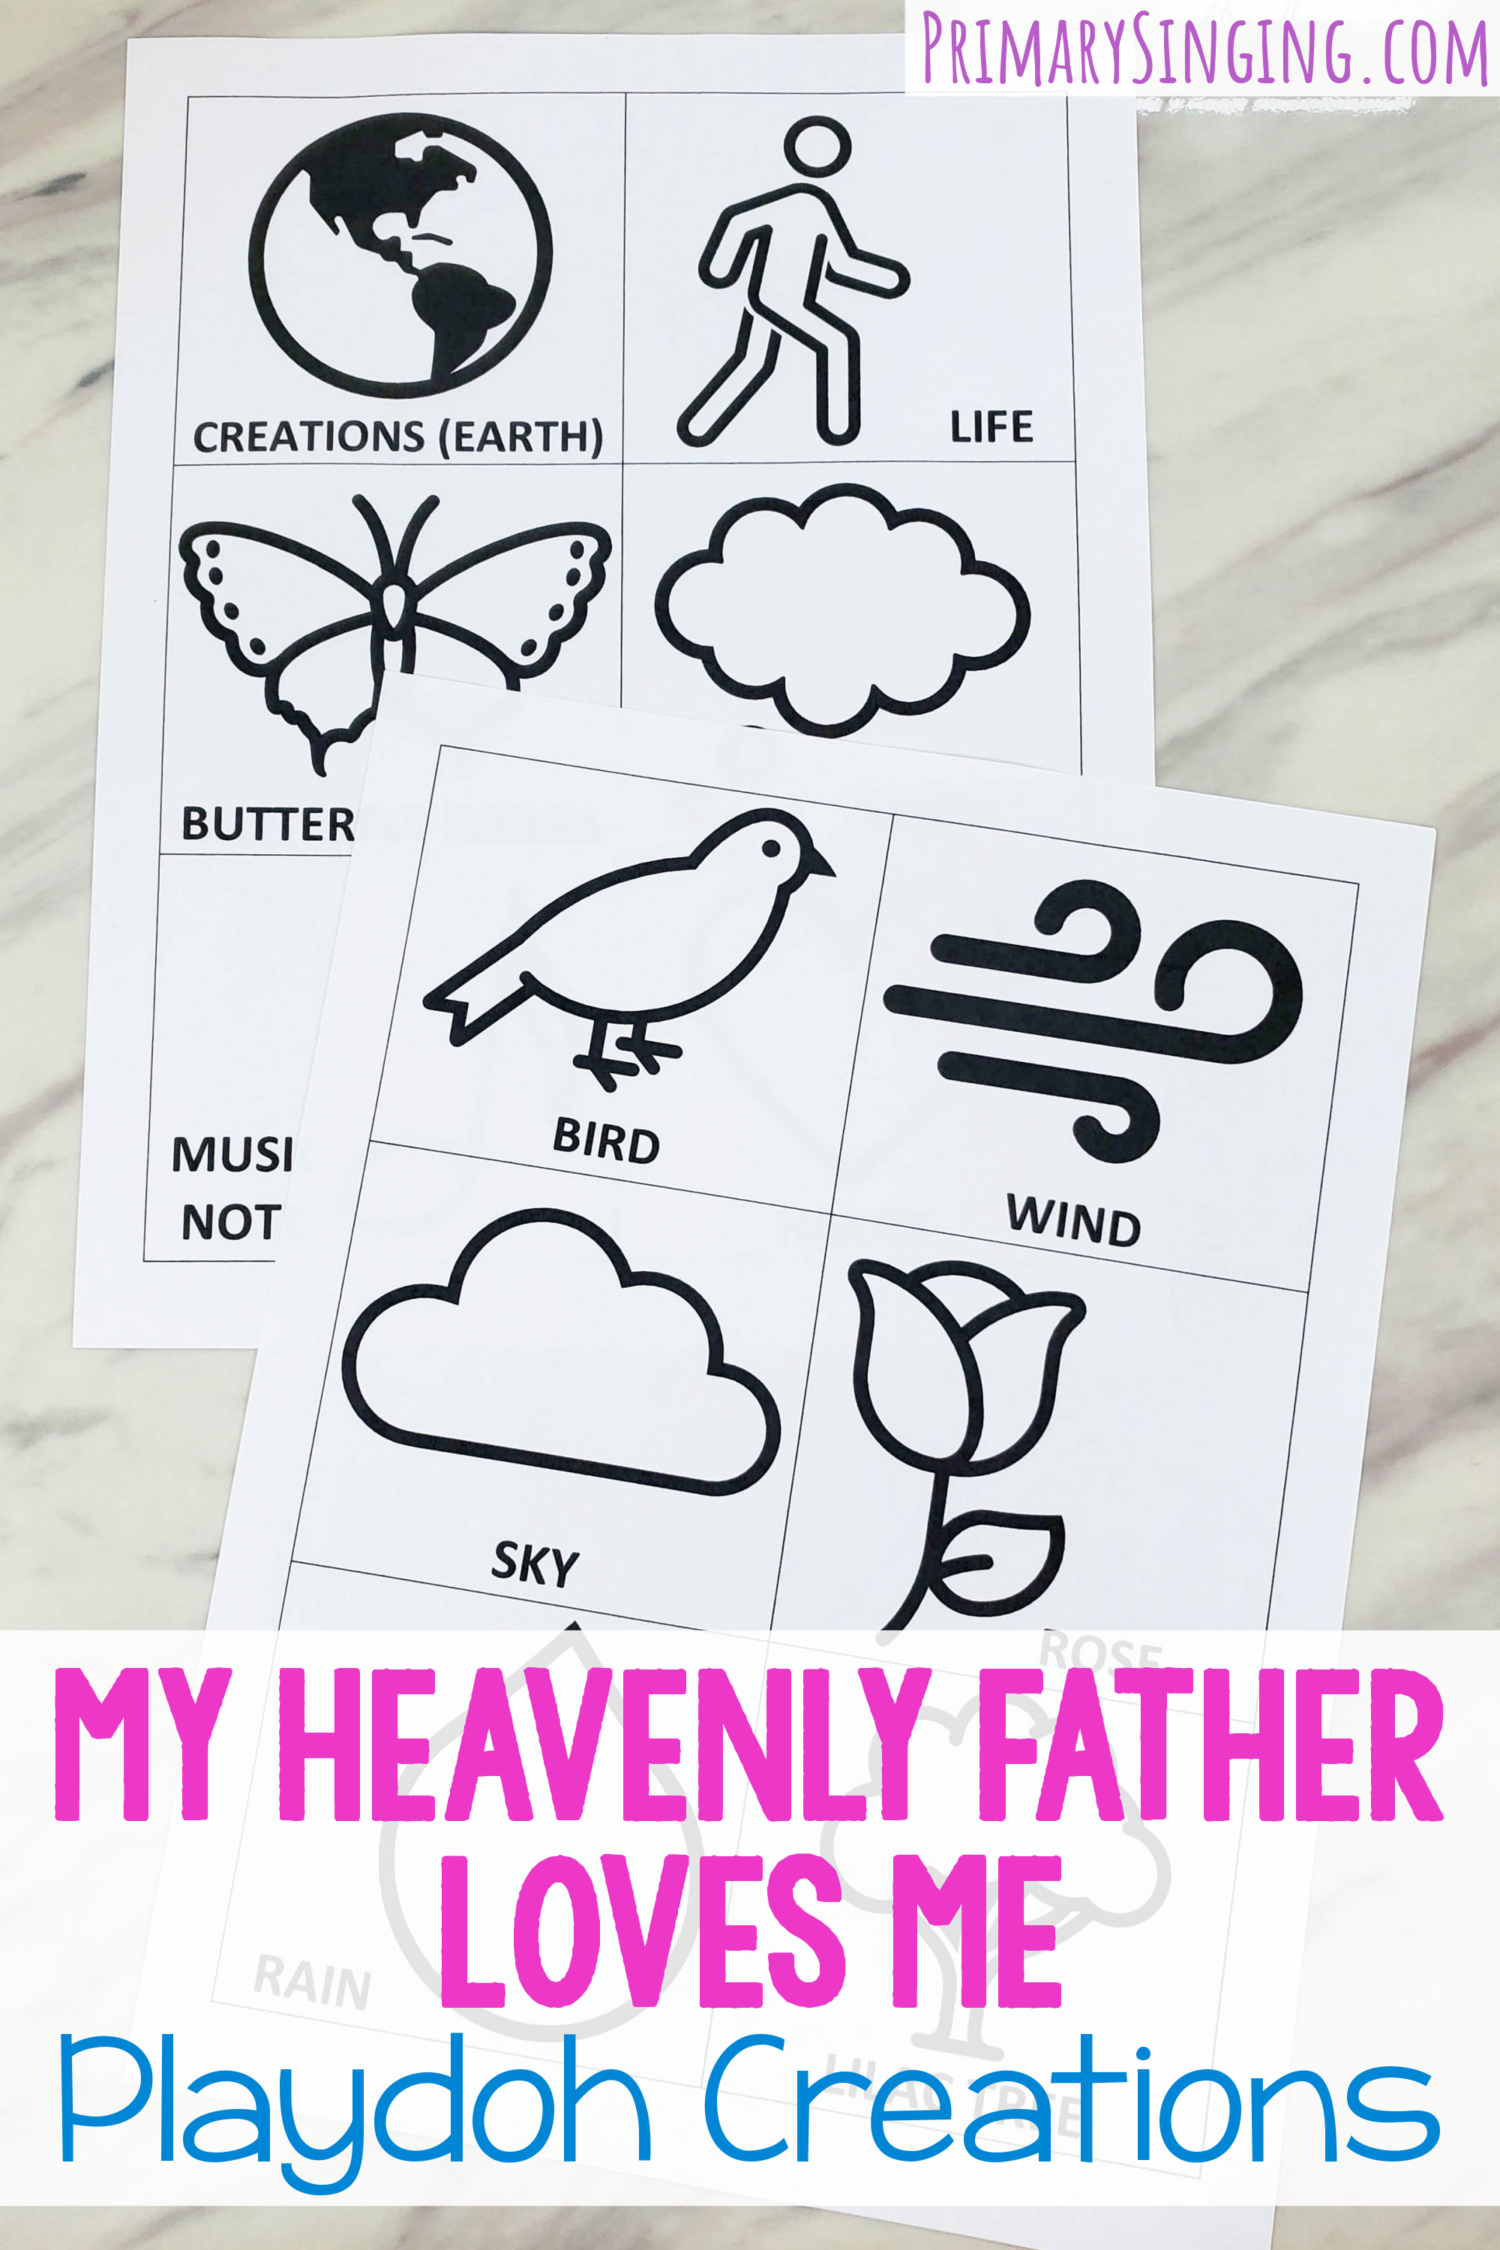 My Heavenly Father Loves Me Singing Time Ideas - Playdoh Creations is a fun visual activity that gets the kids hands on creating with this printable lesson plan!